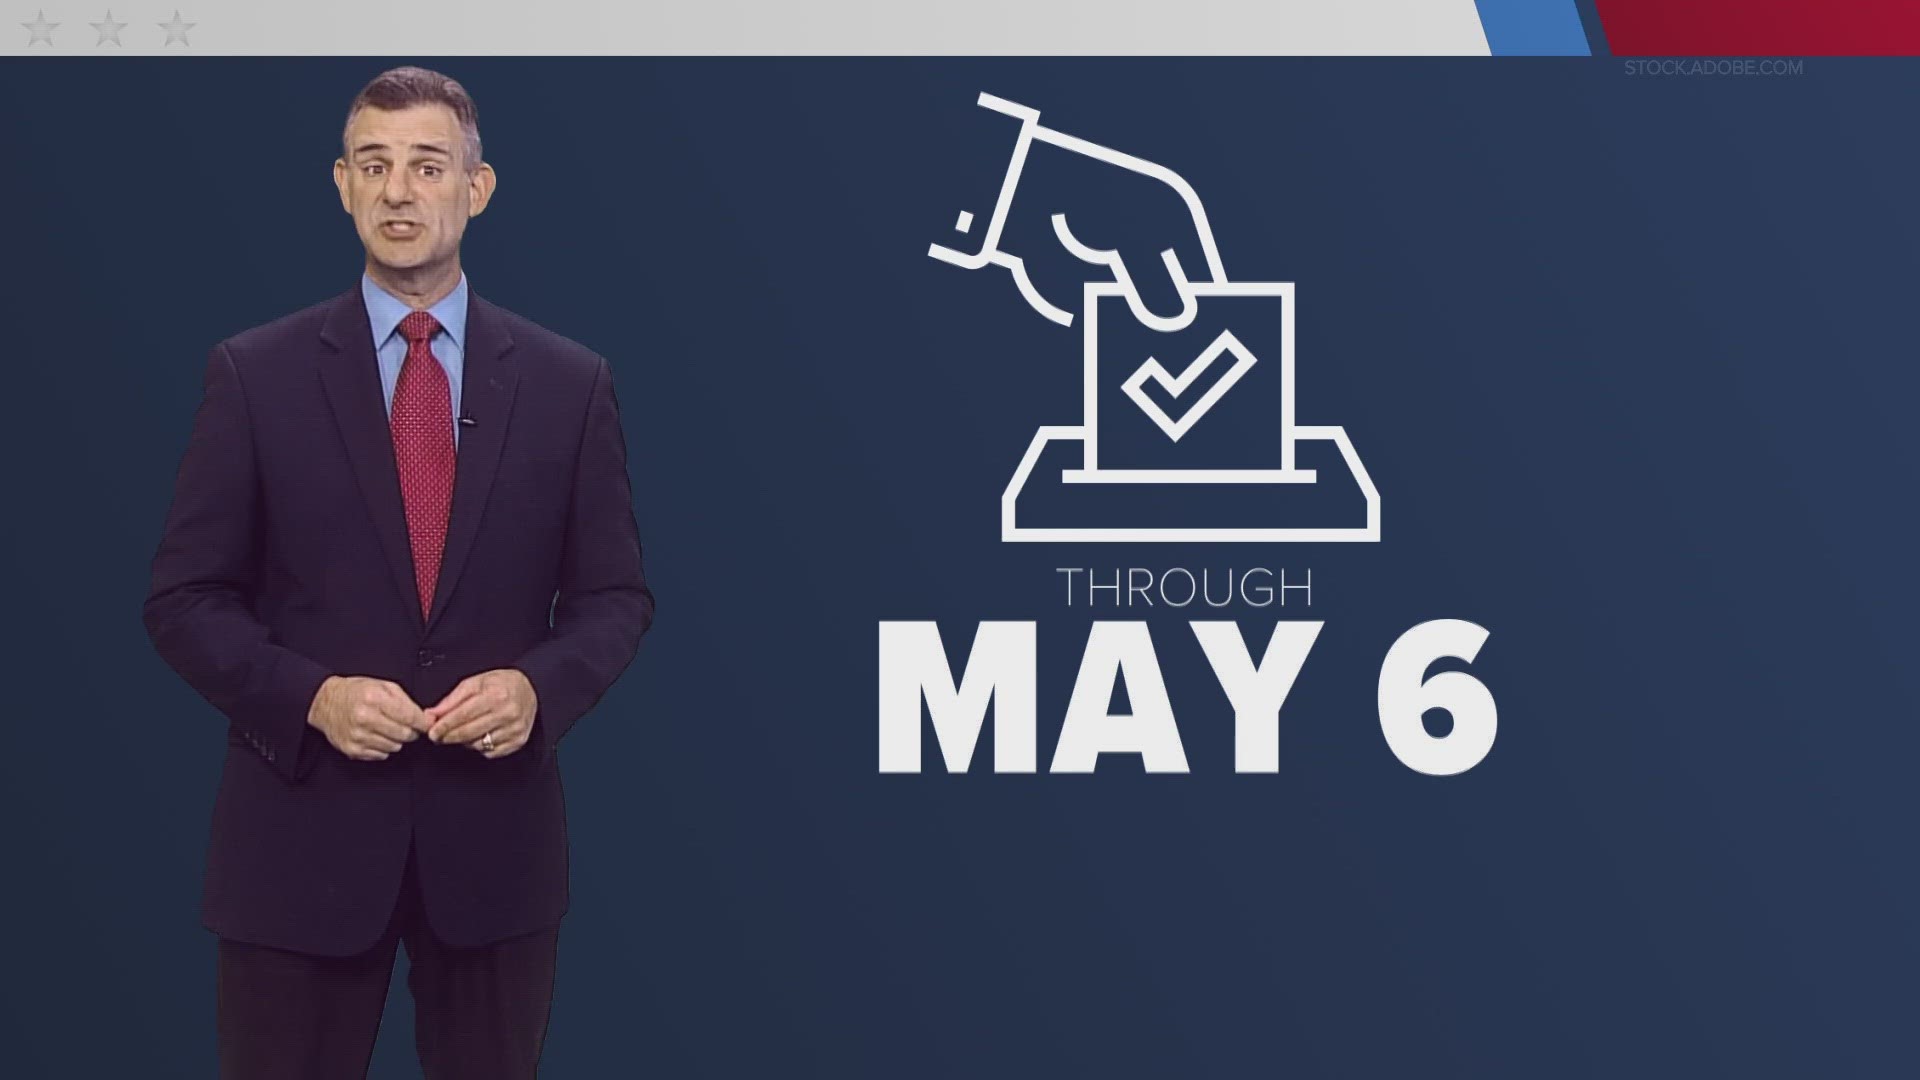 13 Investigates senior reporter Bob Segall breaks down what you need to know to make sure your vote counts in the 2024 election.